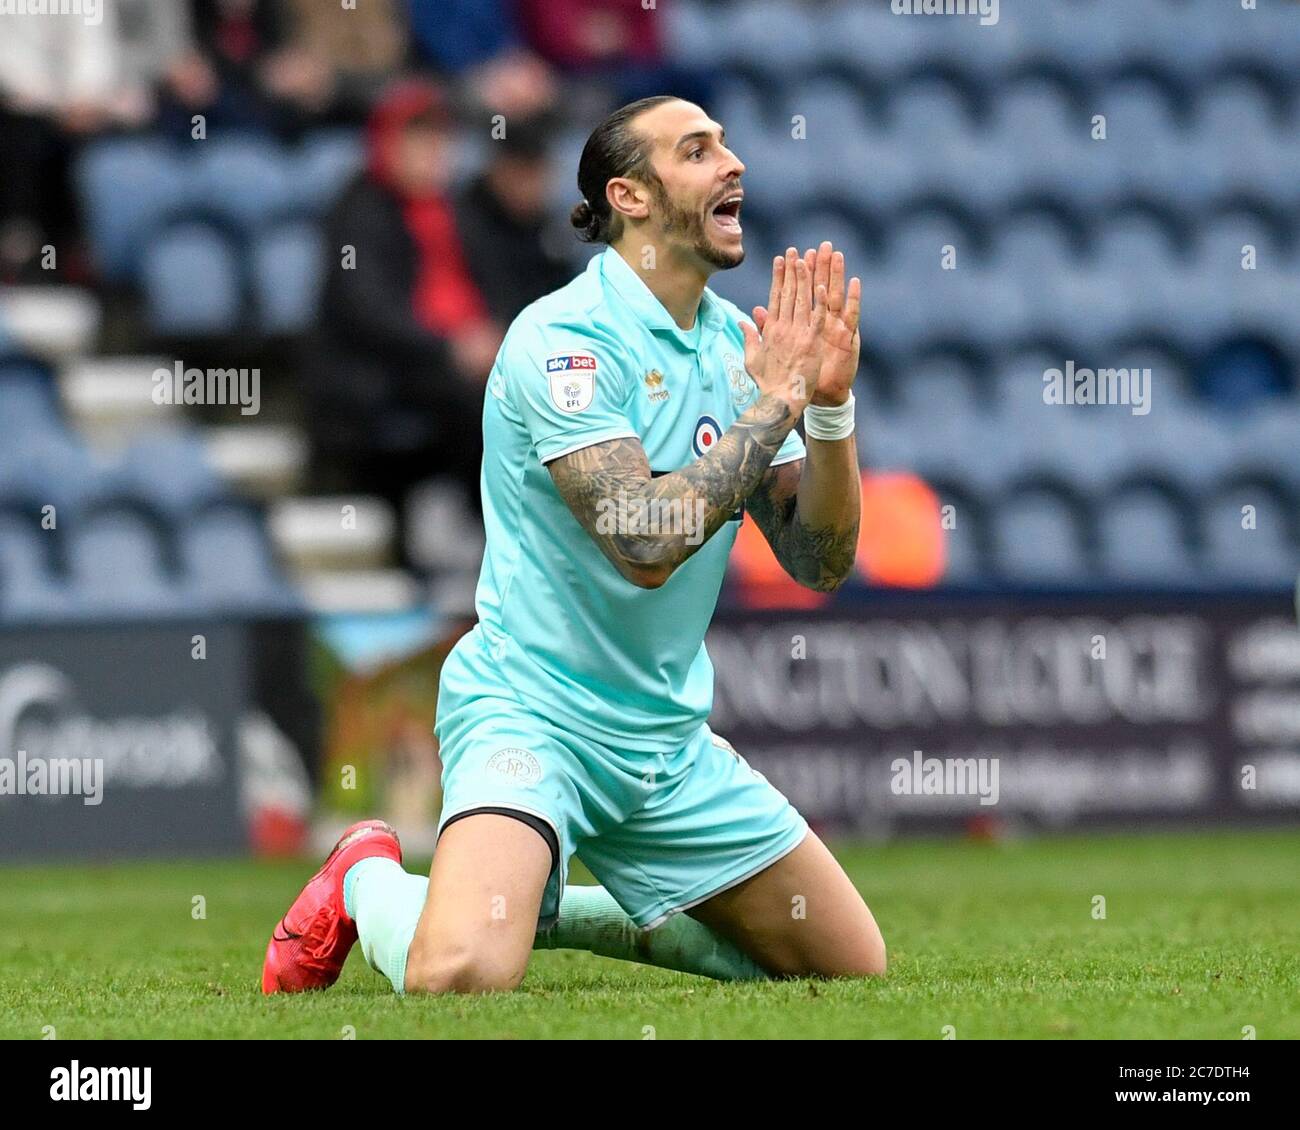 7th March 2020, Deepdale, Preston, England; Sky Bet Championship, Preston North End v Queens Park Rangers : Geoff Cameron (5) of Queens Park Rangers begs the referee not to give him a second yellow card Stock Photo